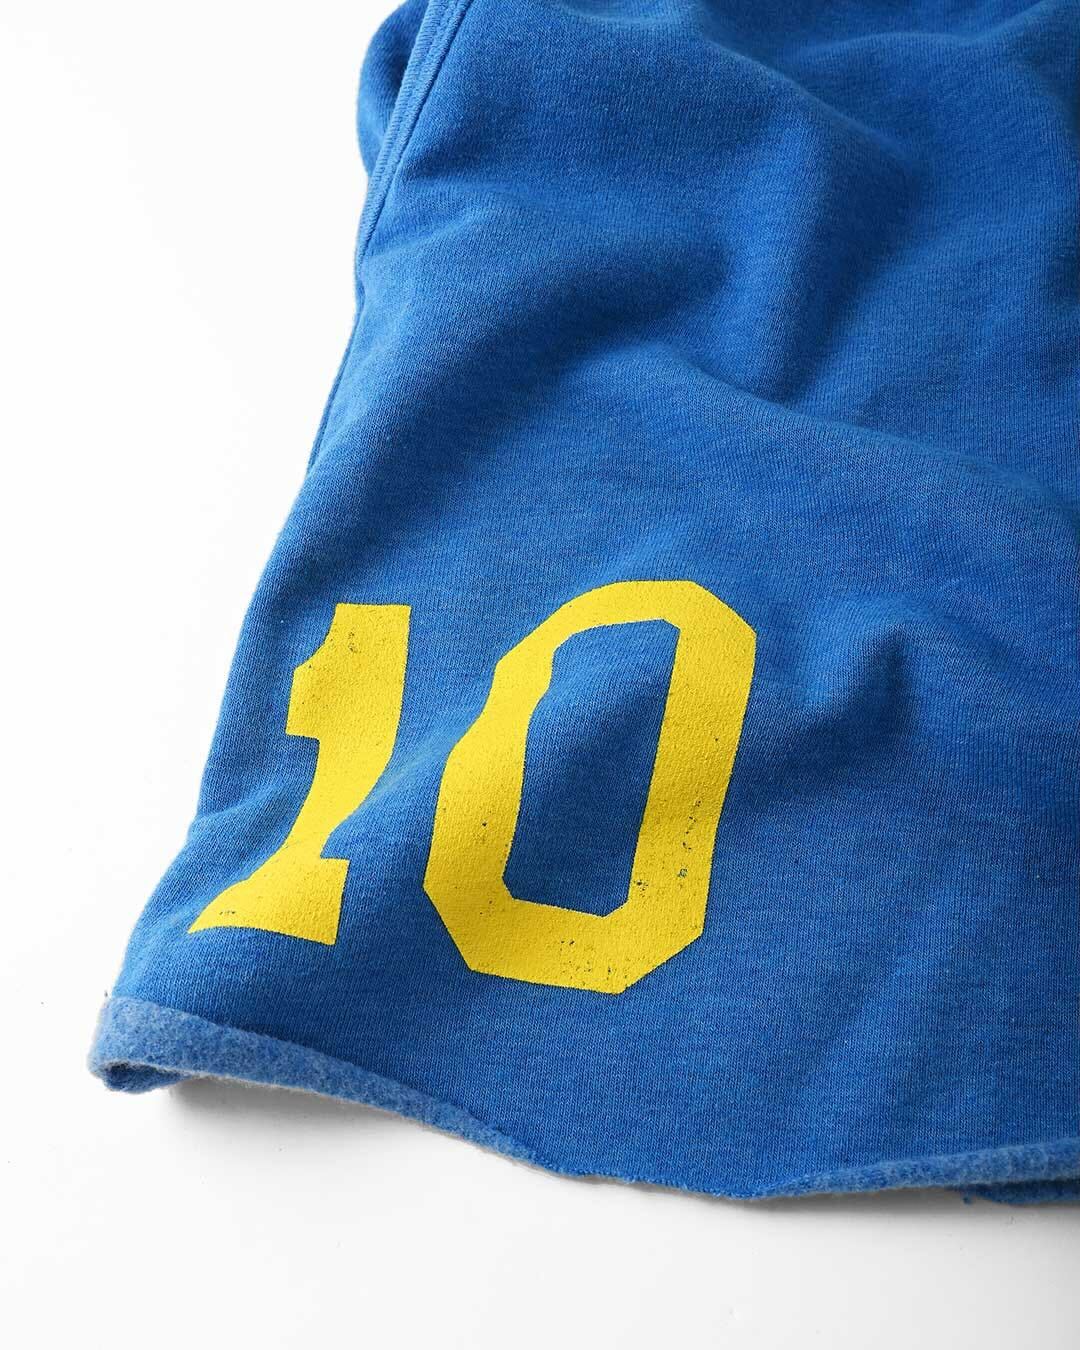 Pelé 1958 Brasil Blue Shorts - Roots of Fight Canada